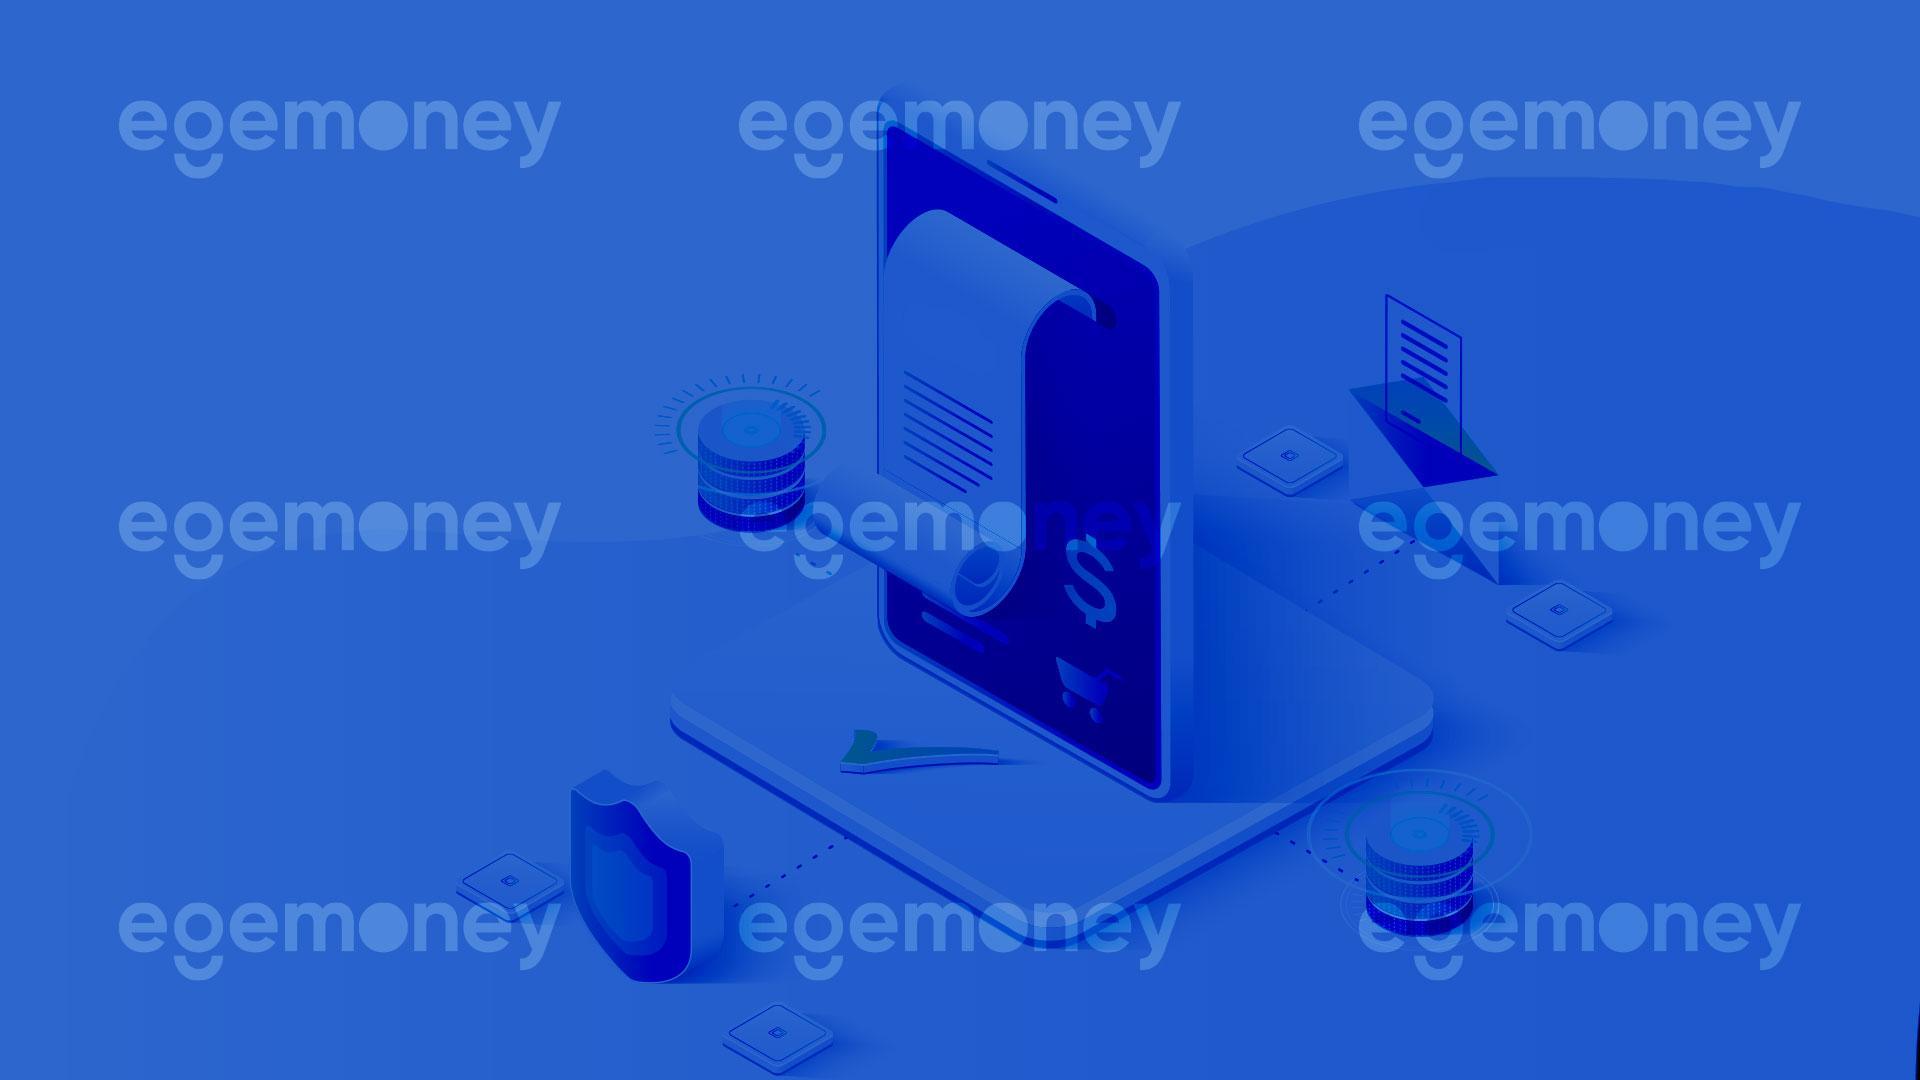 What Are The Order Types in EgeMoney?